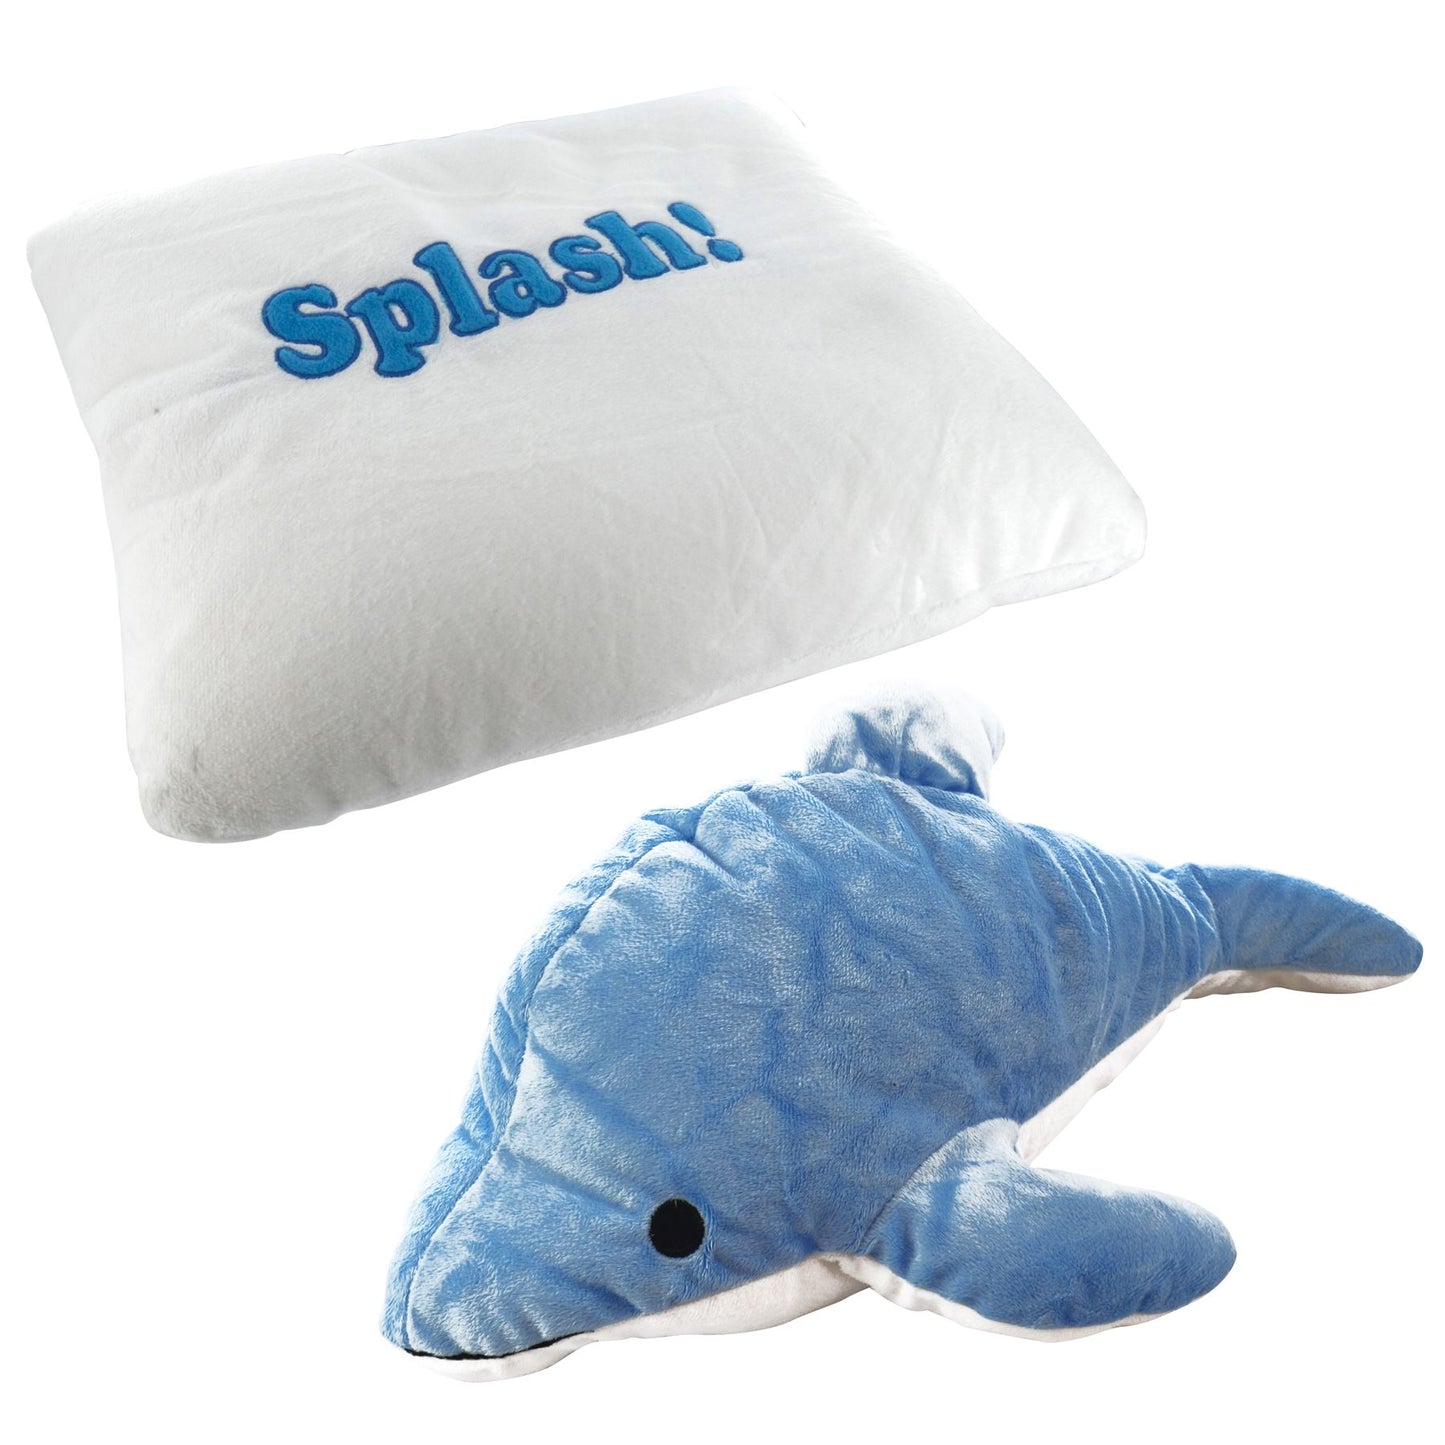 Cuddle Up with a Soft Plush Animal Pillow